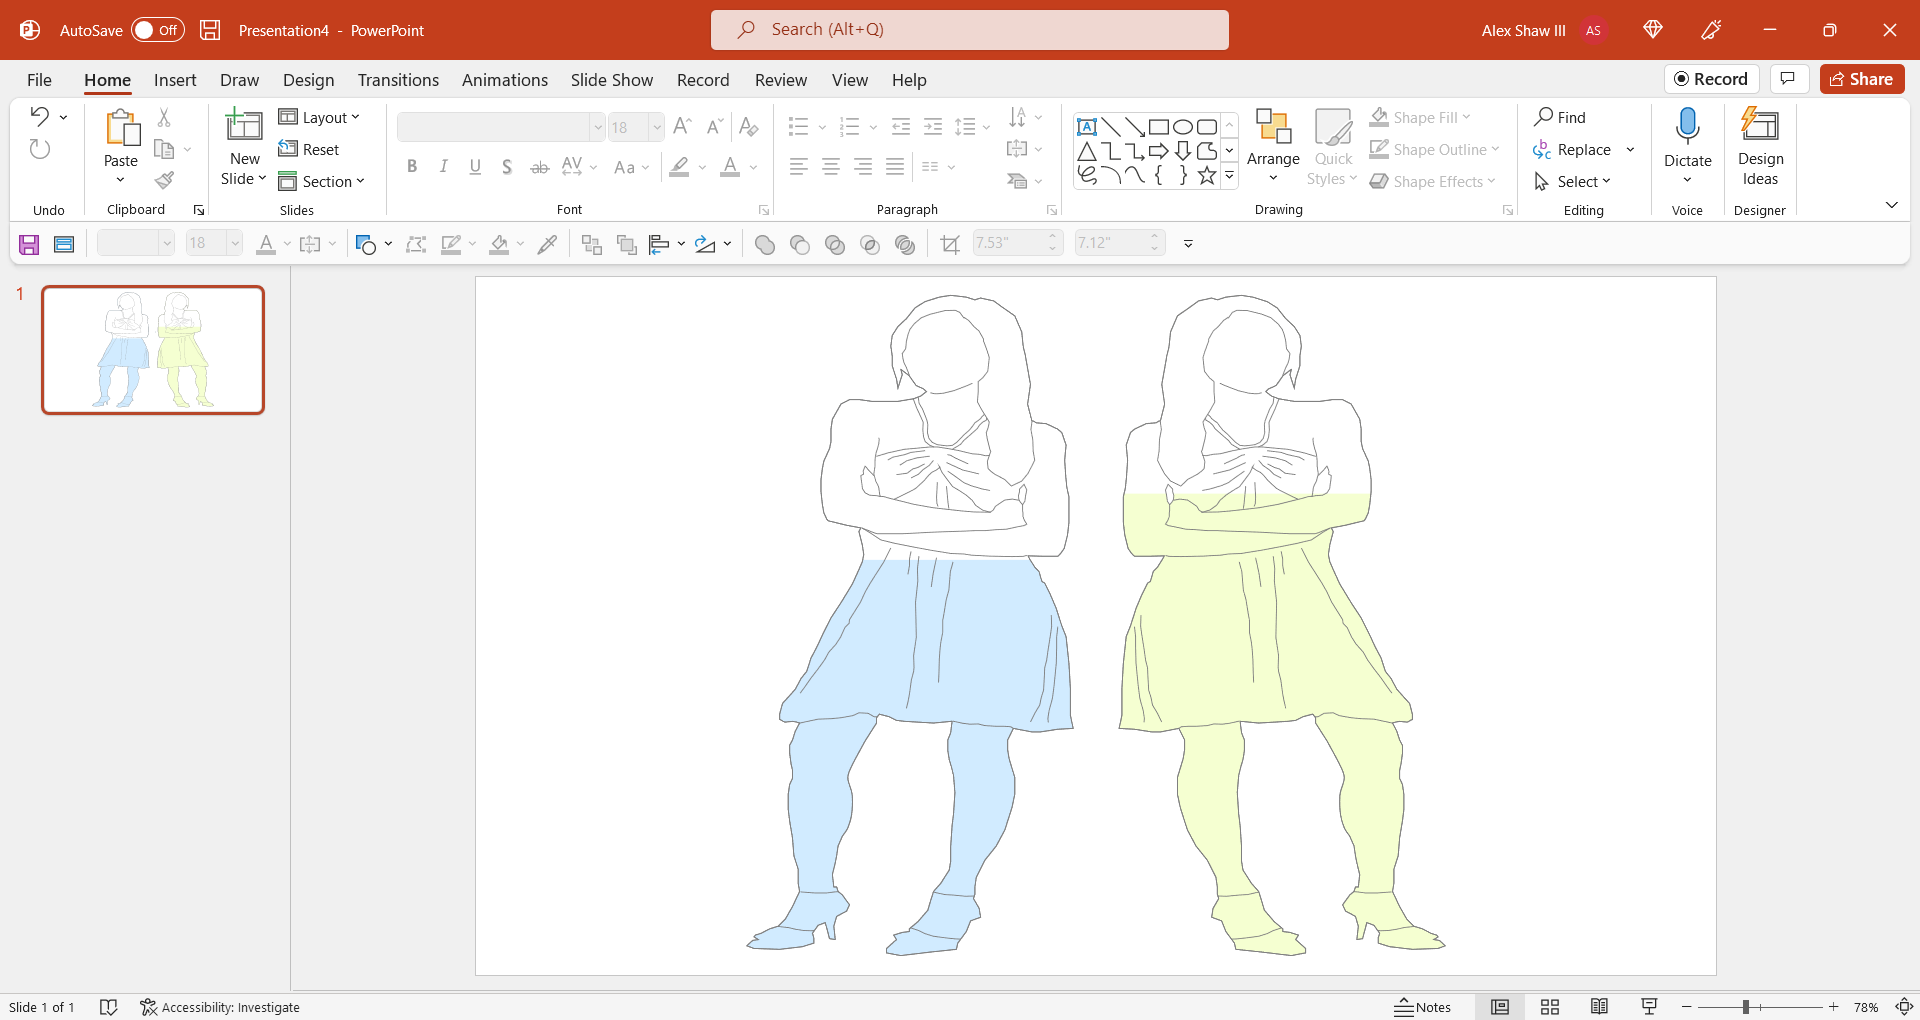 Flip an image in PowerPoint - How to